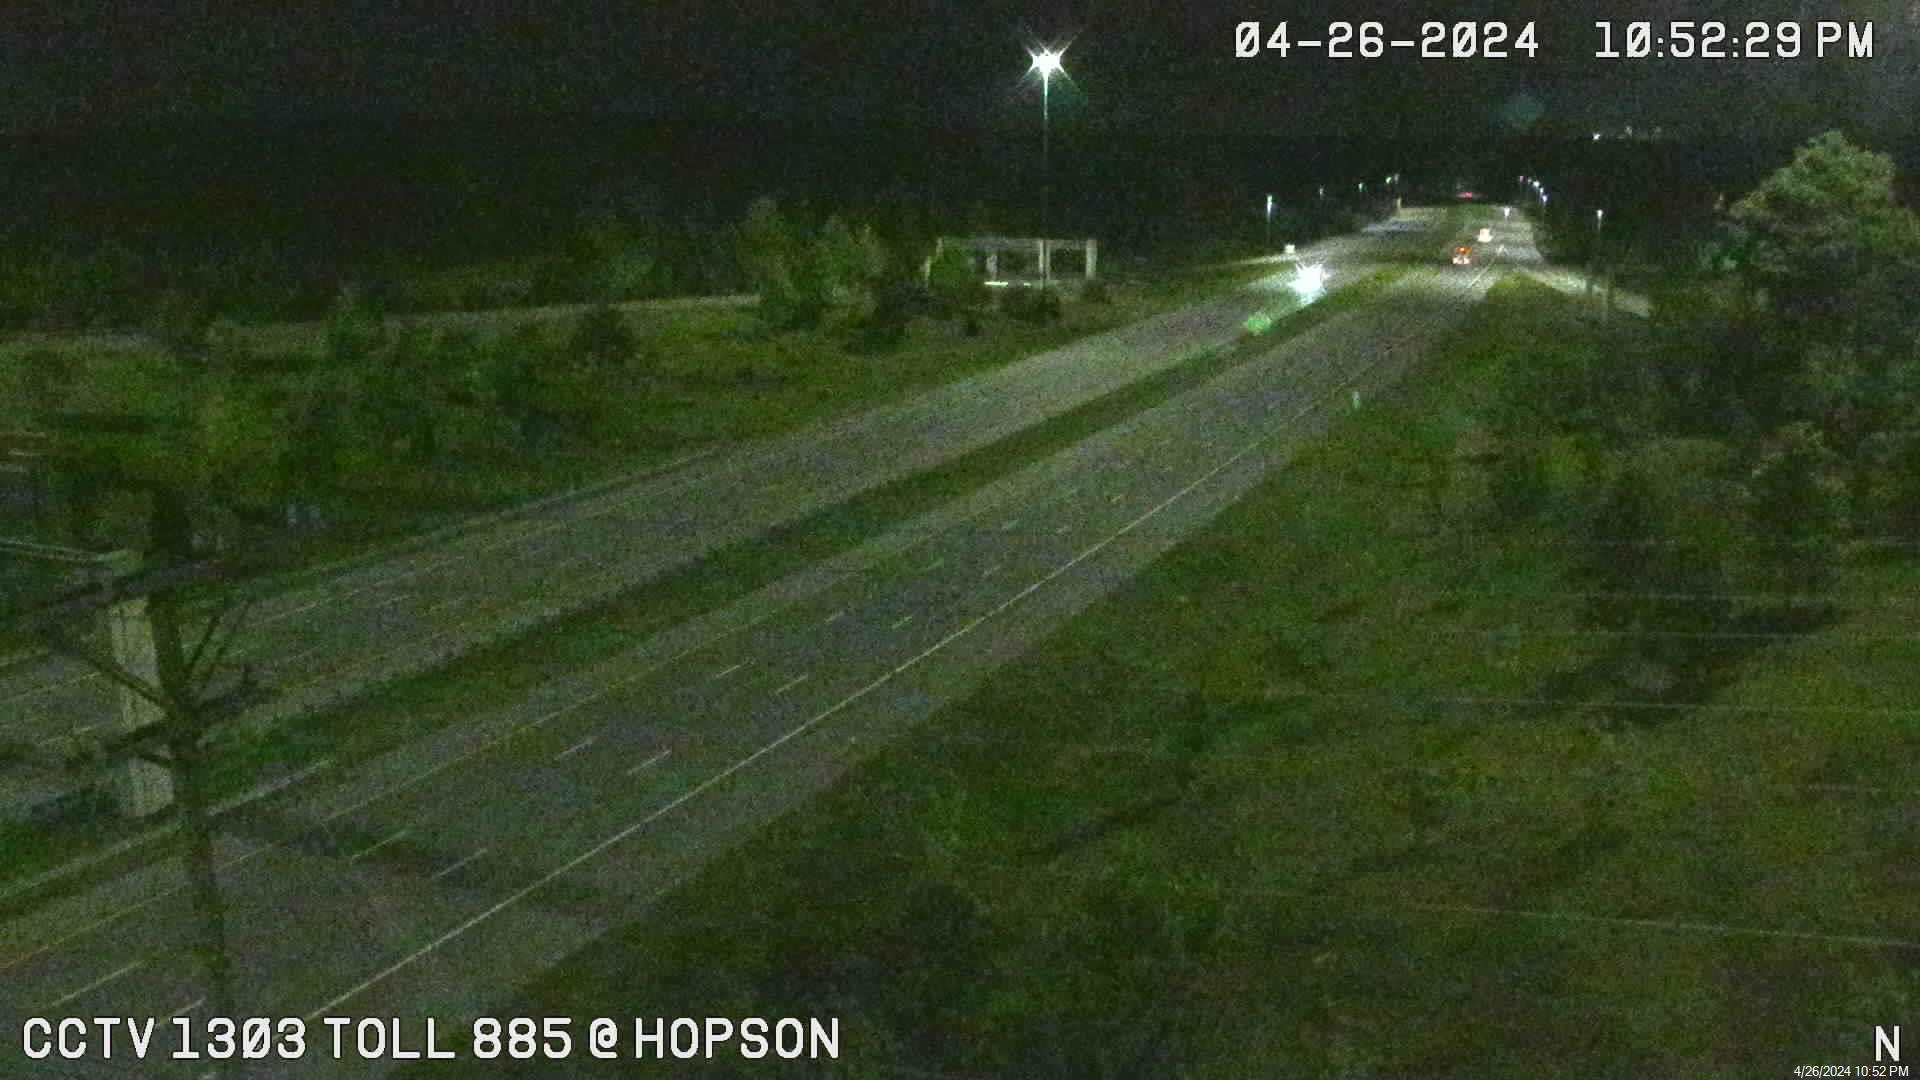 Traffic Cam NC 147 (Toll) & Hopson Road - Mile Marker 3 Player